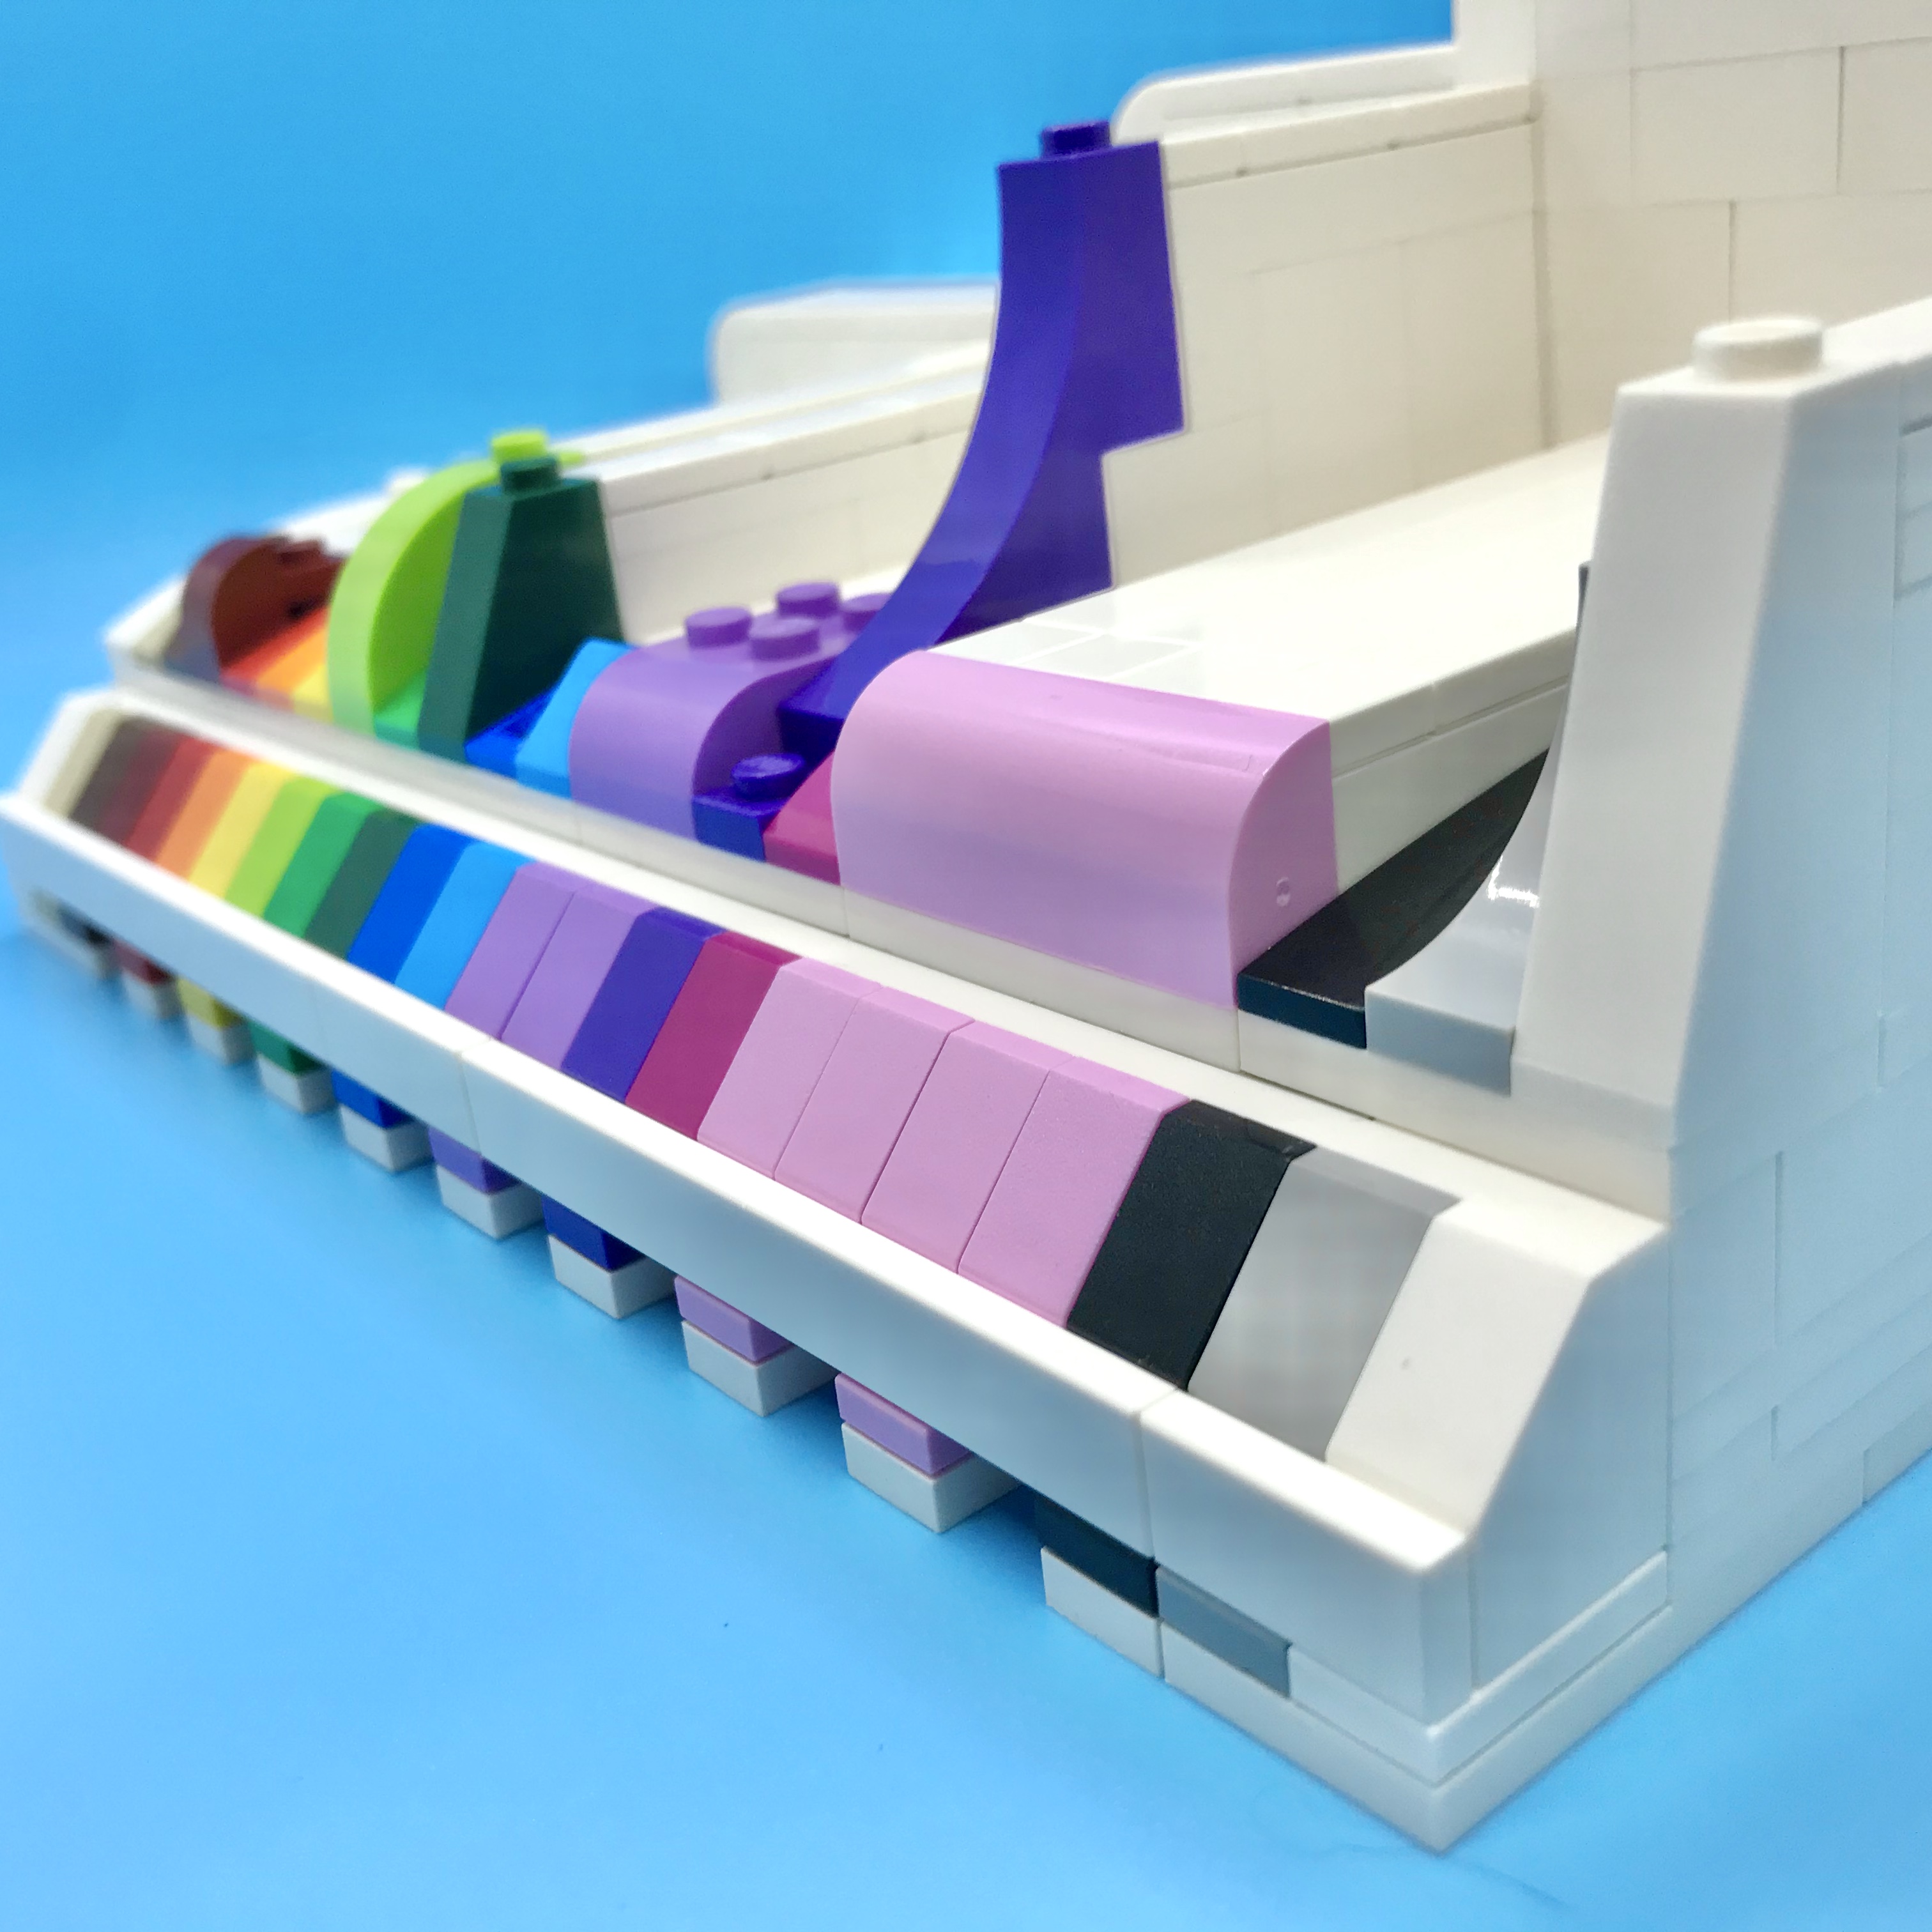 A LEGO slope display, with different slope elements and in a pleasing color order. Angled view.